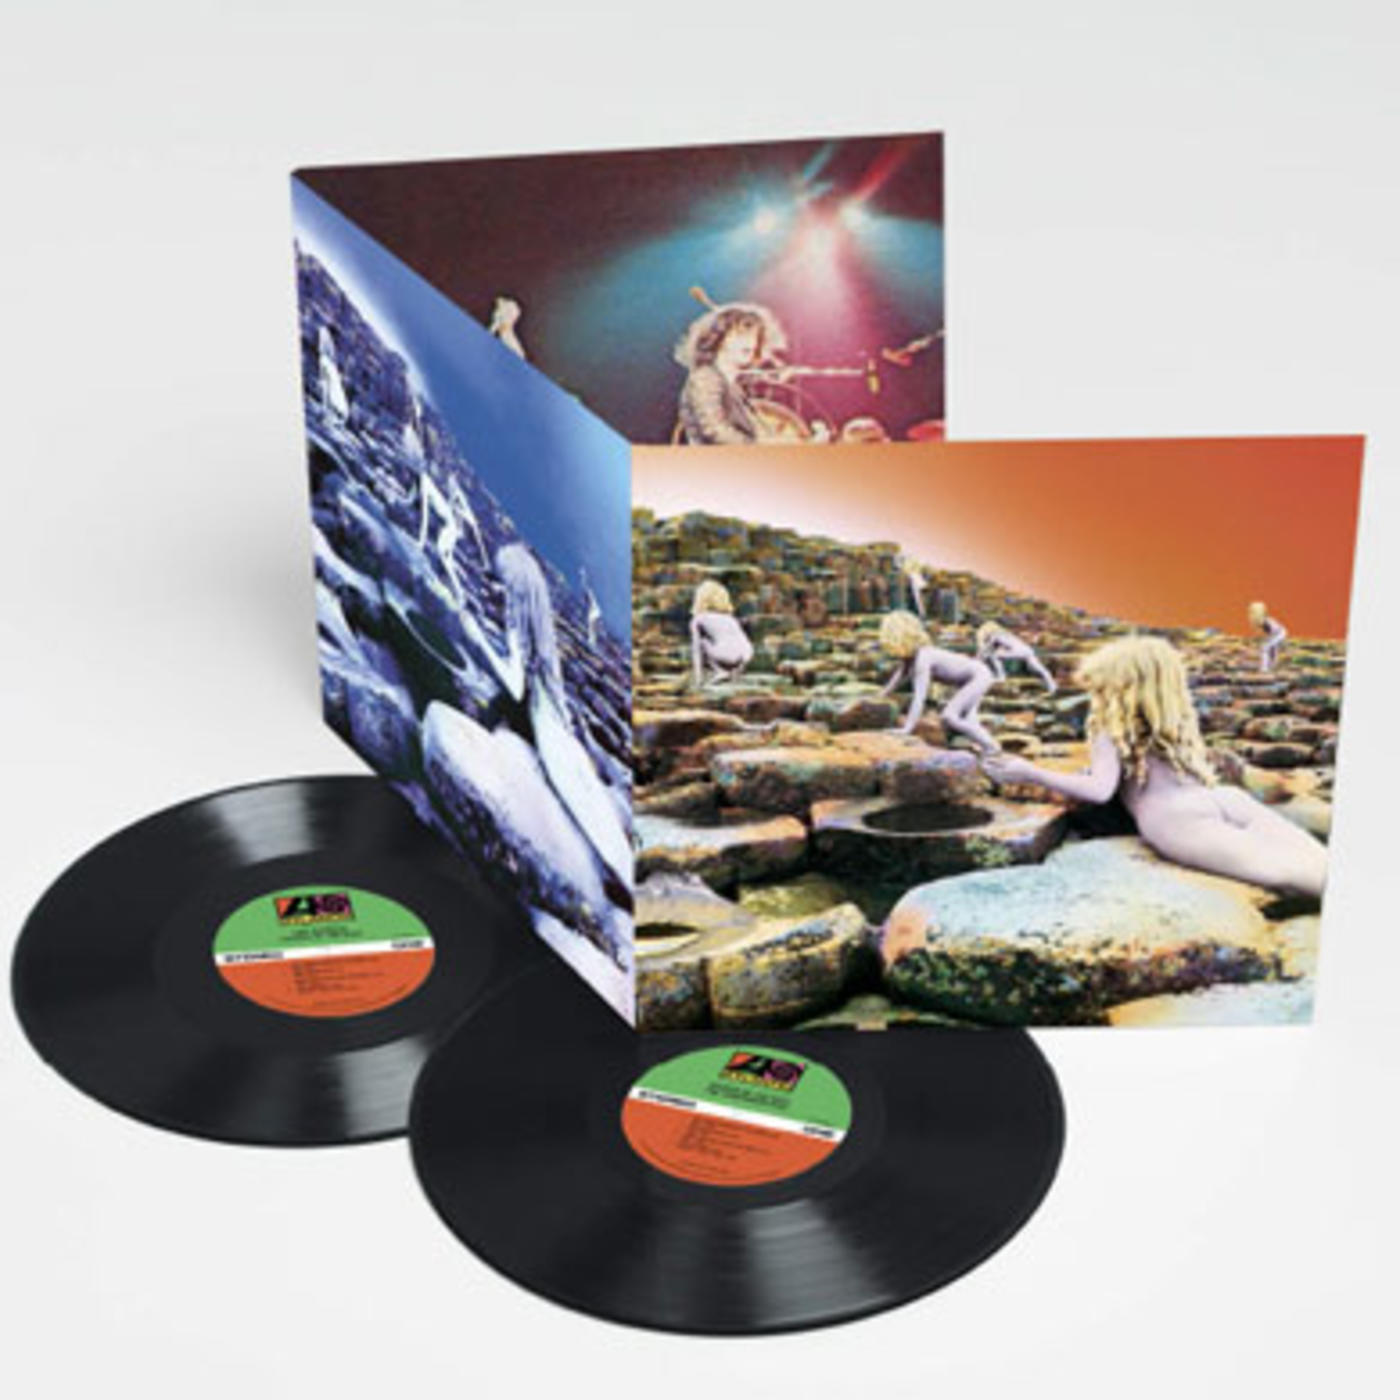 Houses of the Holy - Deluxe Edition Remastered Vinyl